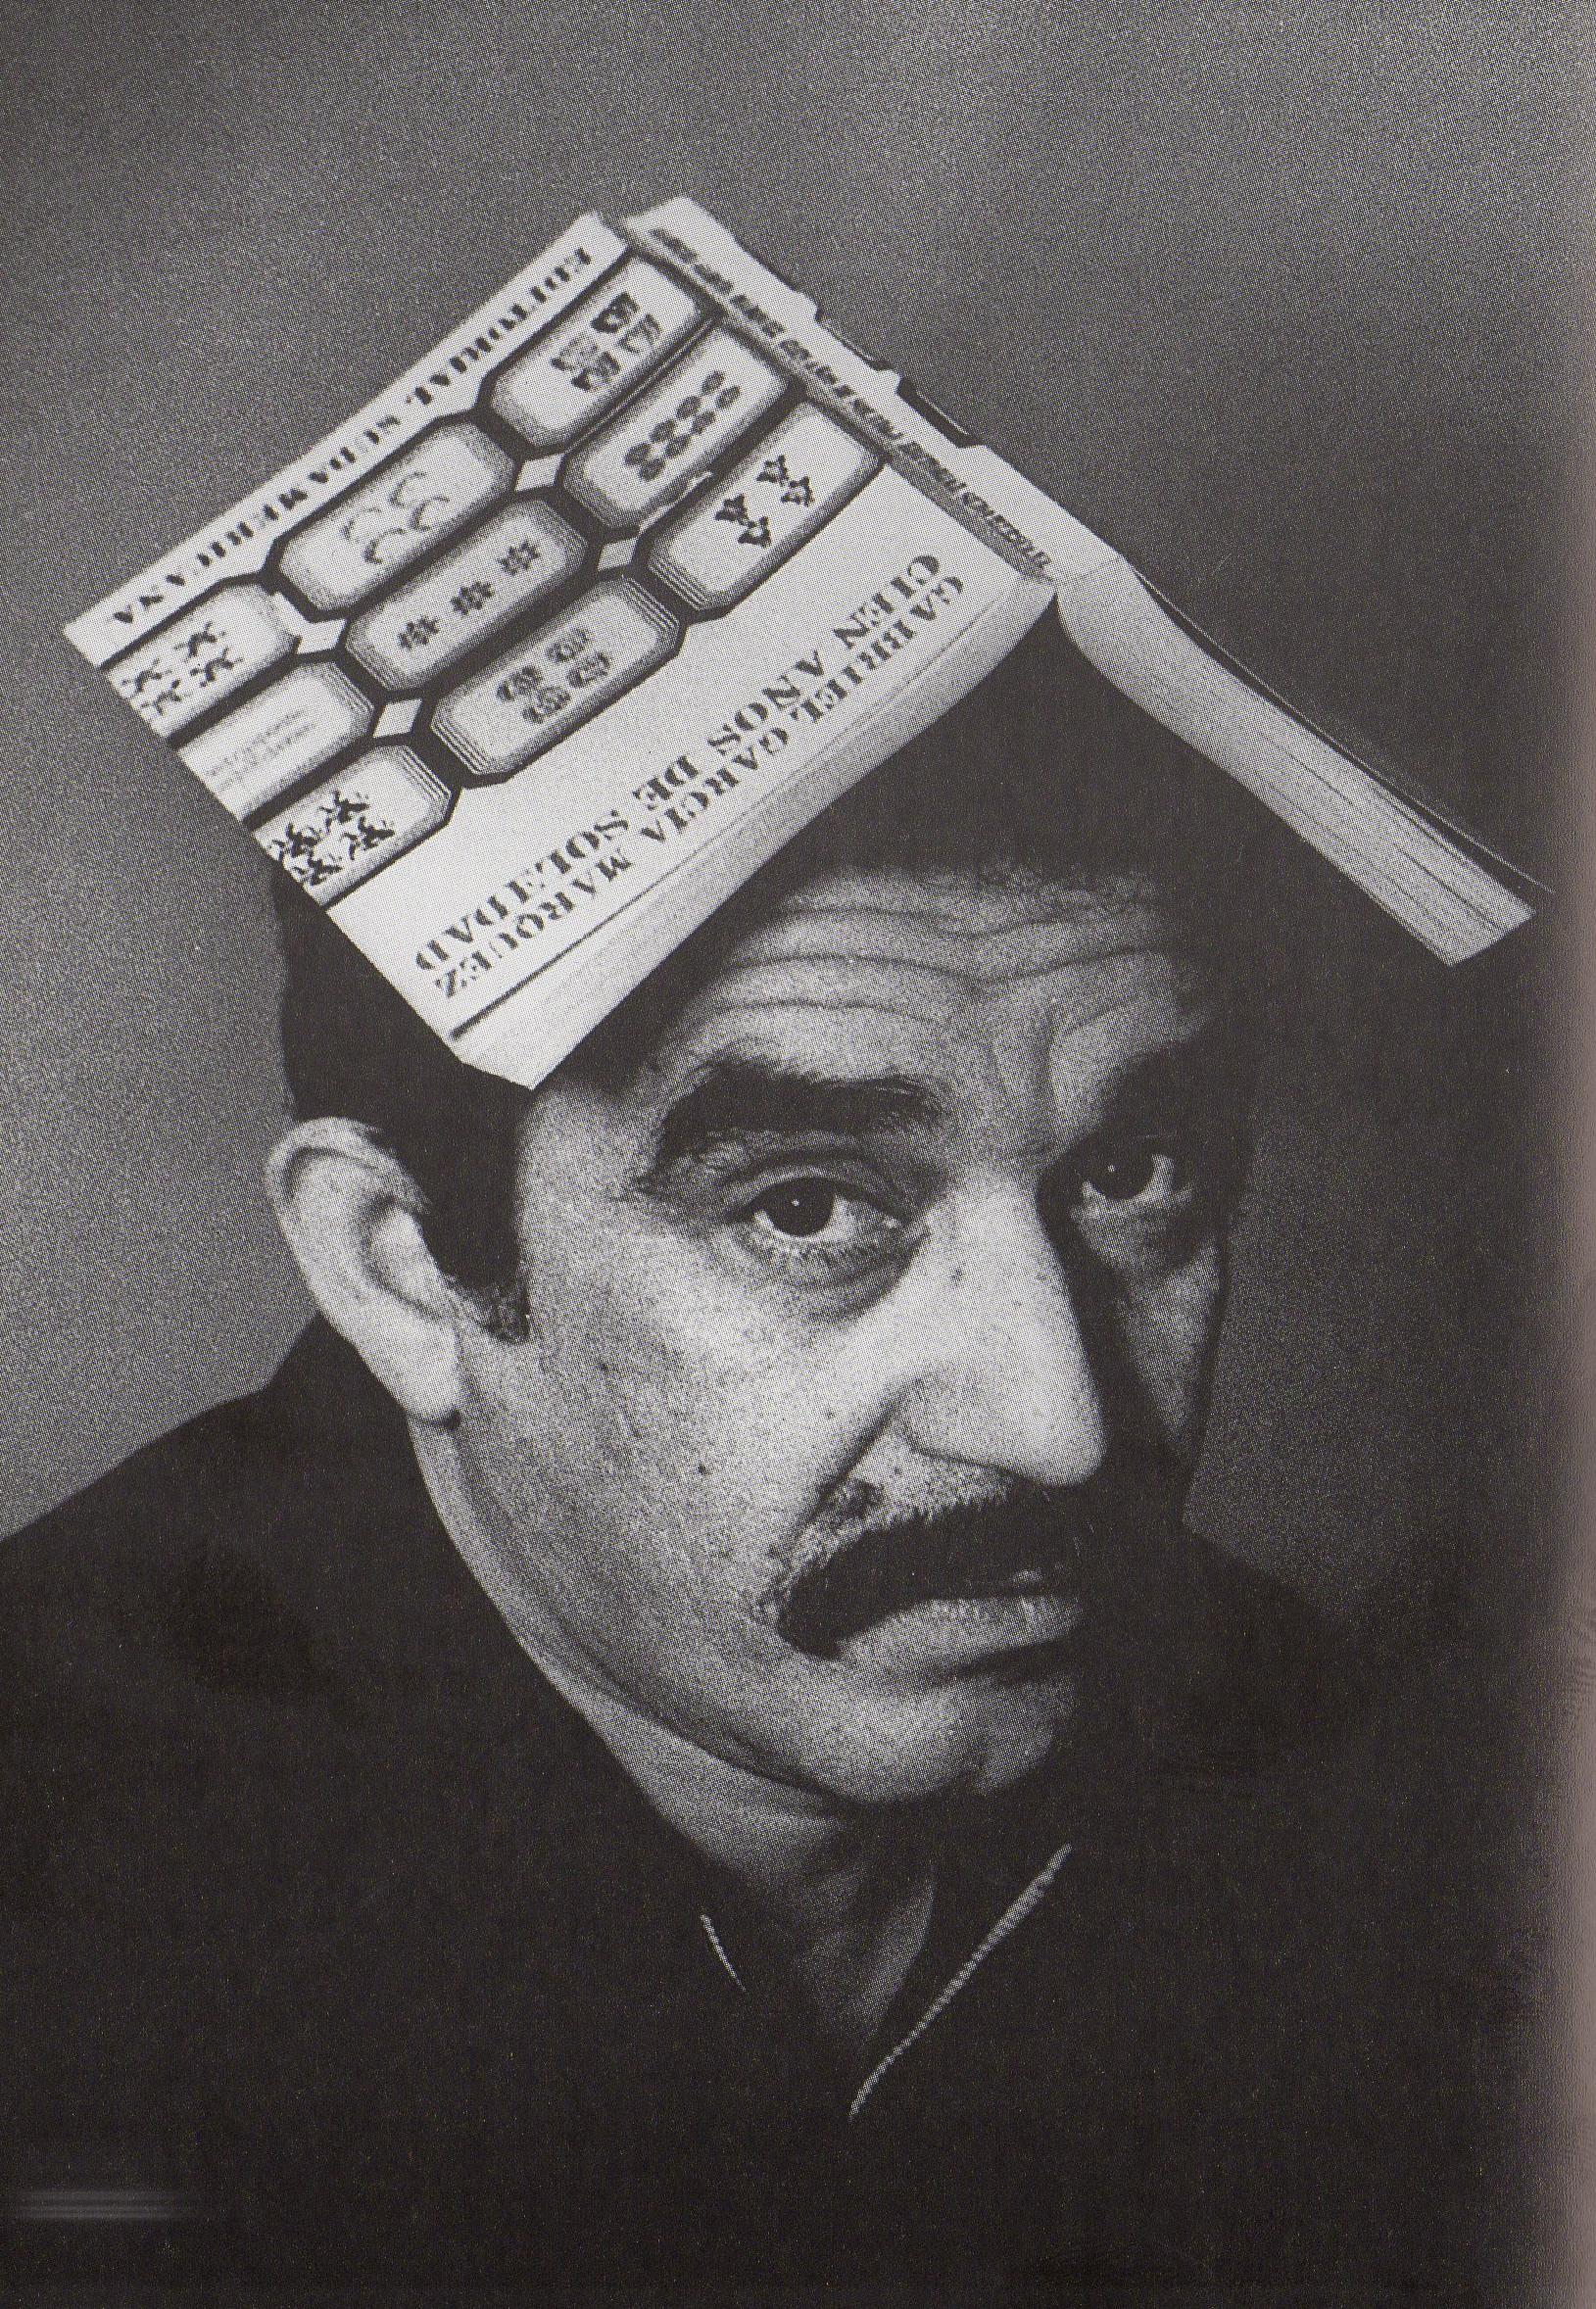 Gabriel Garcia Marquez author of e Hundred Years of Solitude and Love in the Time of Cholera